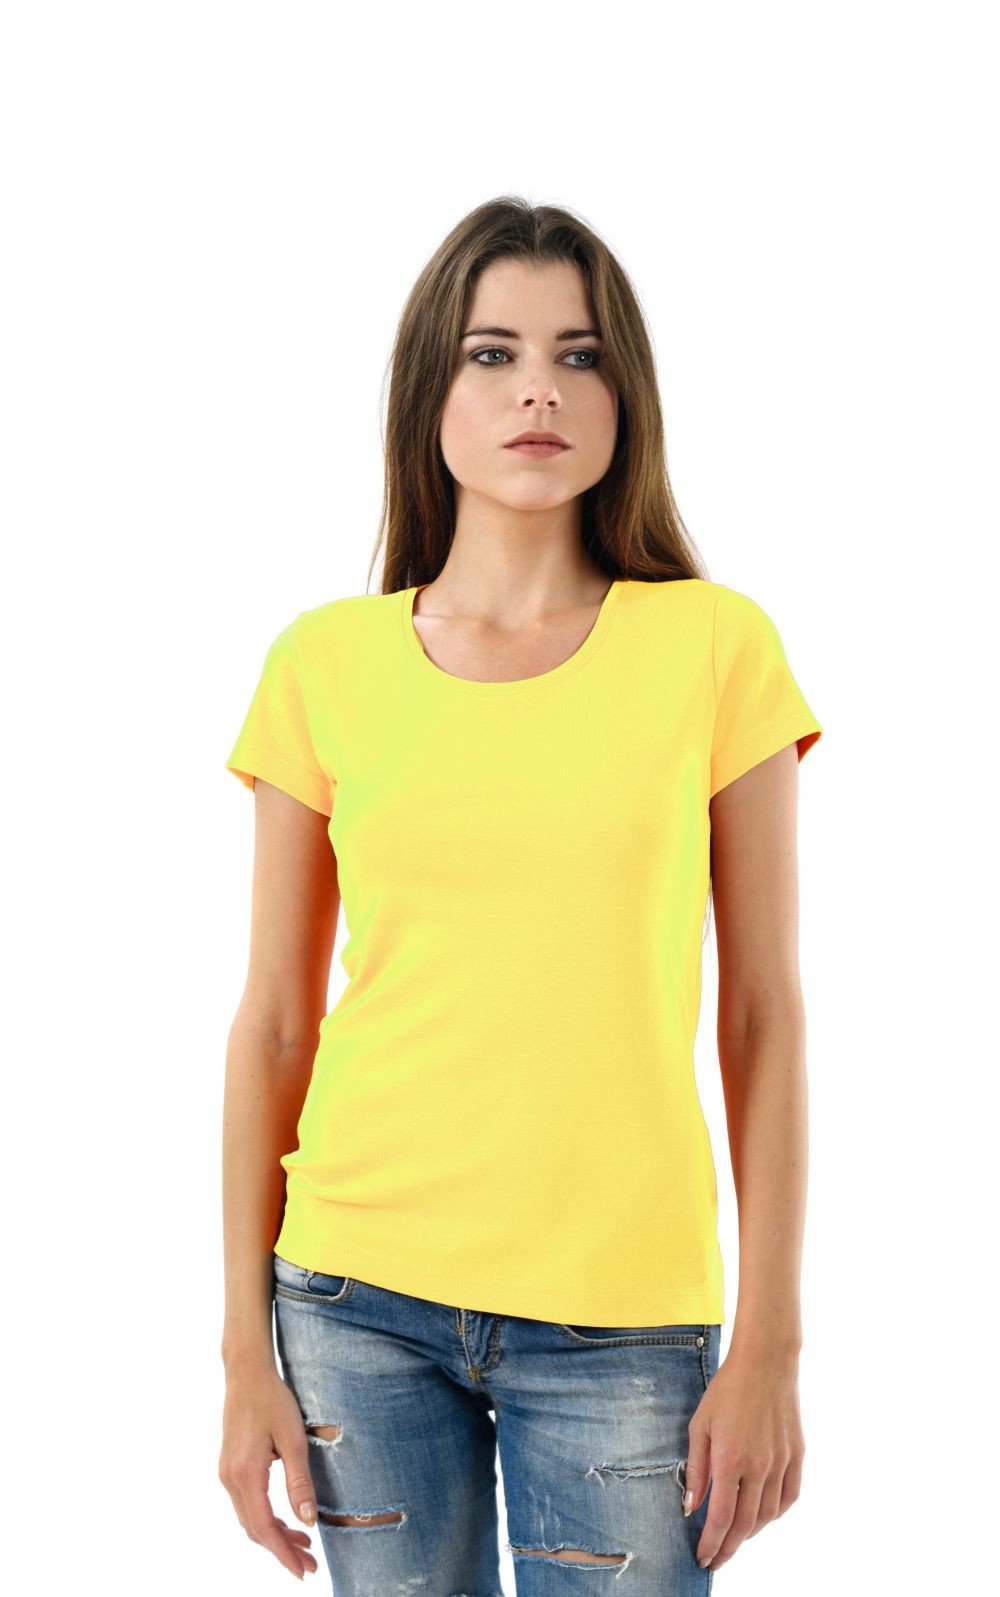 DOUBLE F ROUND NECK HALF SLEEVE YELLOW COLOR PLAIN T-SHIRT FOR WOMEN